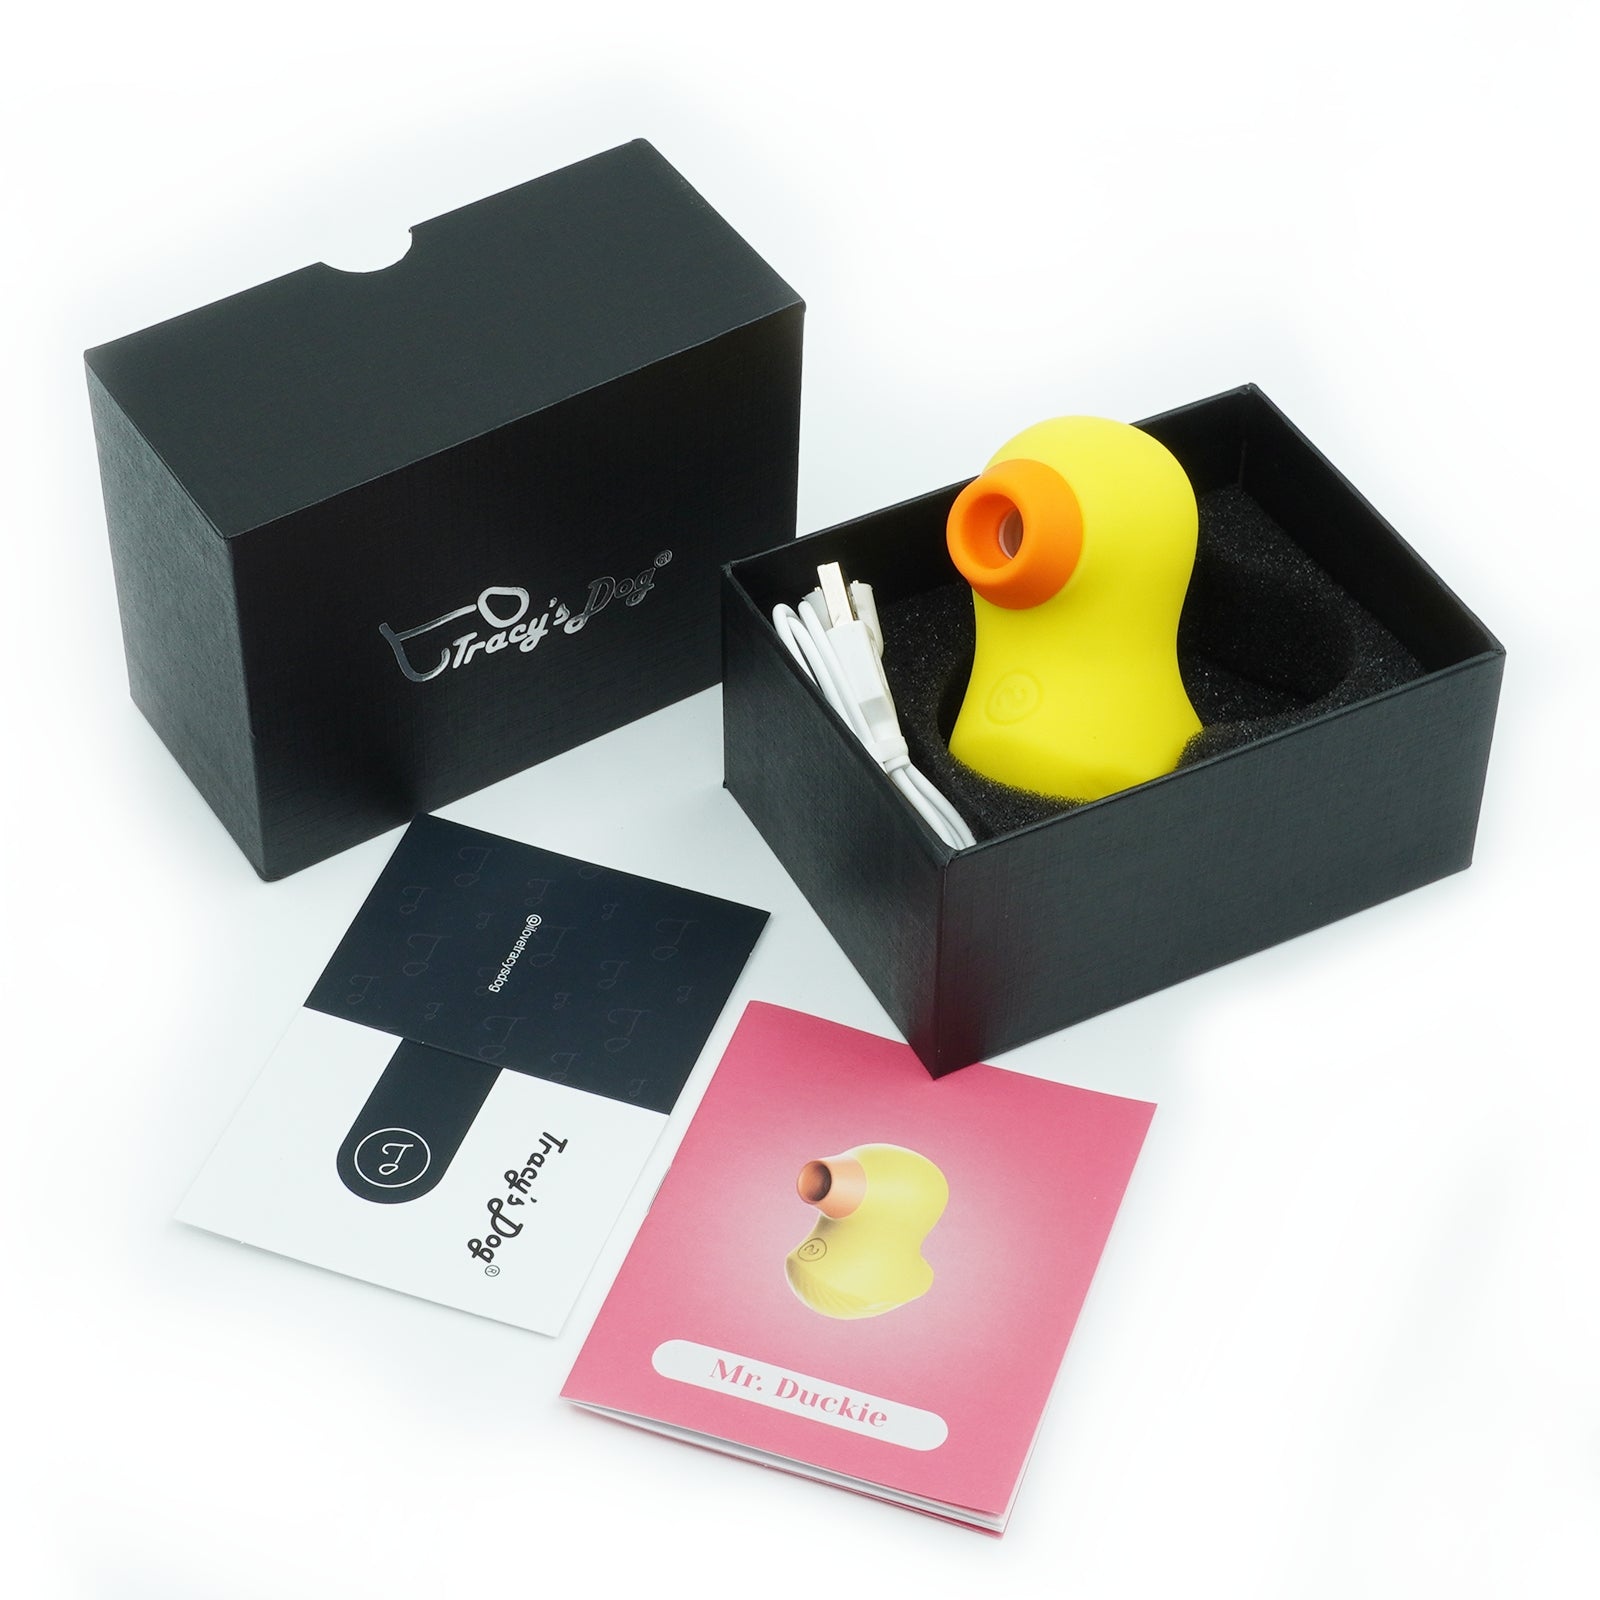 Mr. Duckie Sucking Vibrator, 3 in 1 sucking vibrator, 7 different suction modes, 100% waterproof vibrator, body-safe medical grade silicone, Build With Pleasure Air technology, Portable size and easy to clean